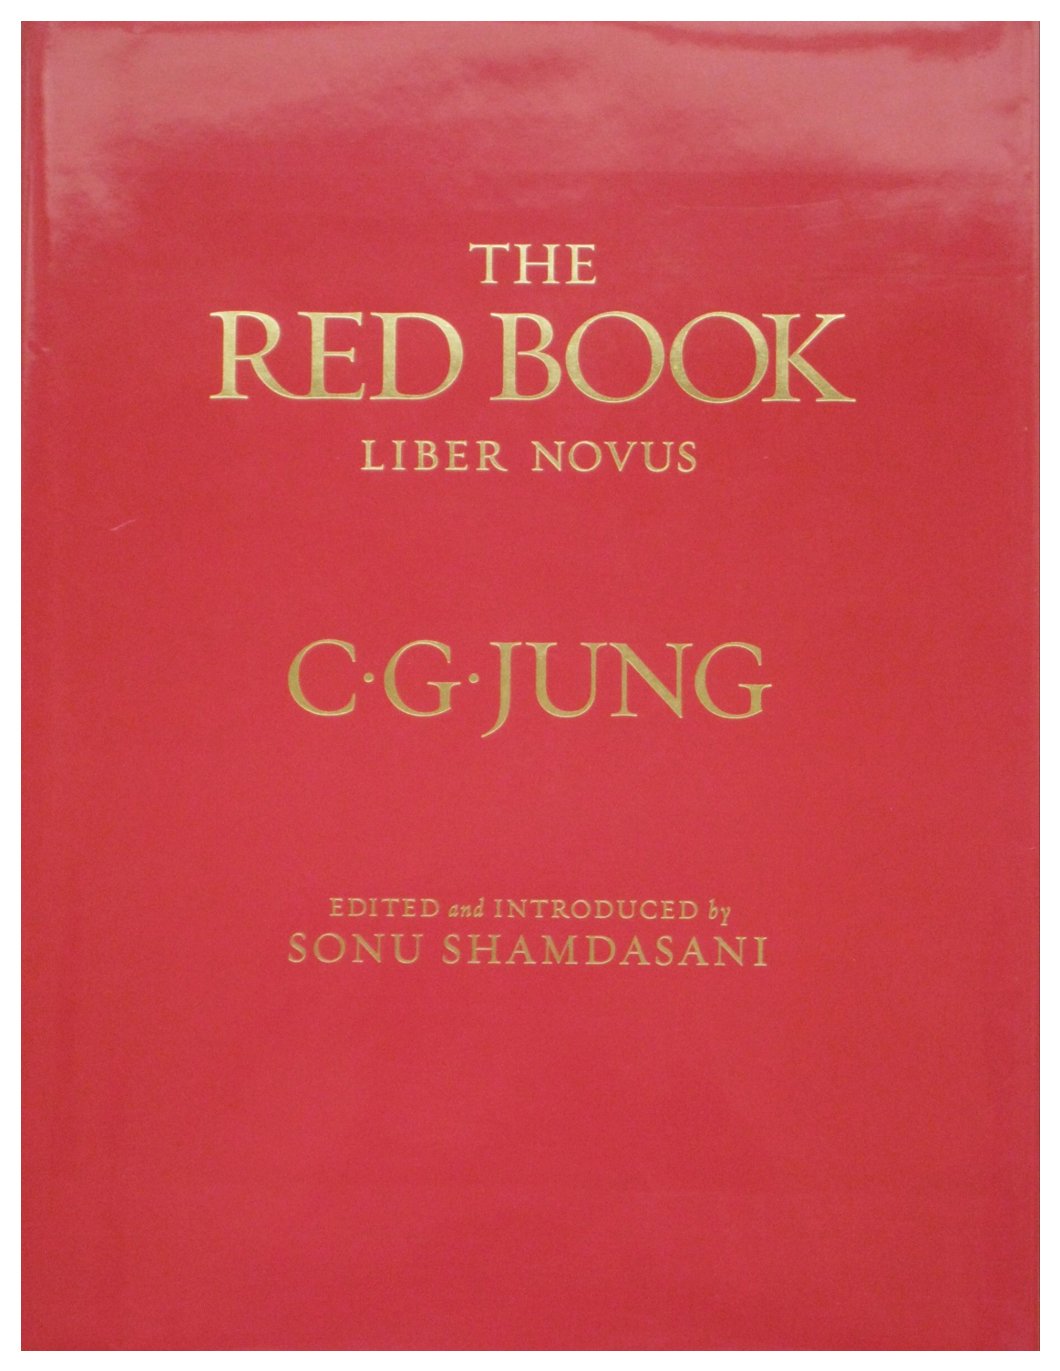 The Red Book Cover.jpg